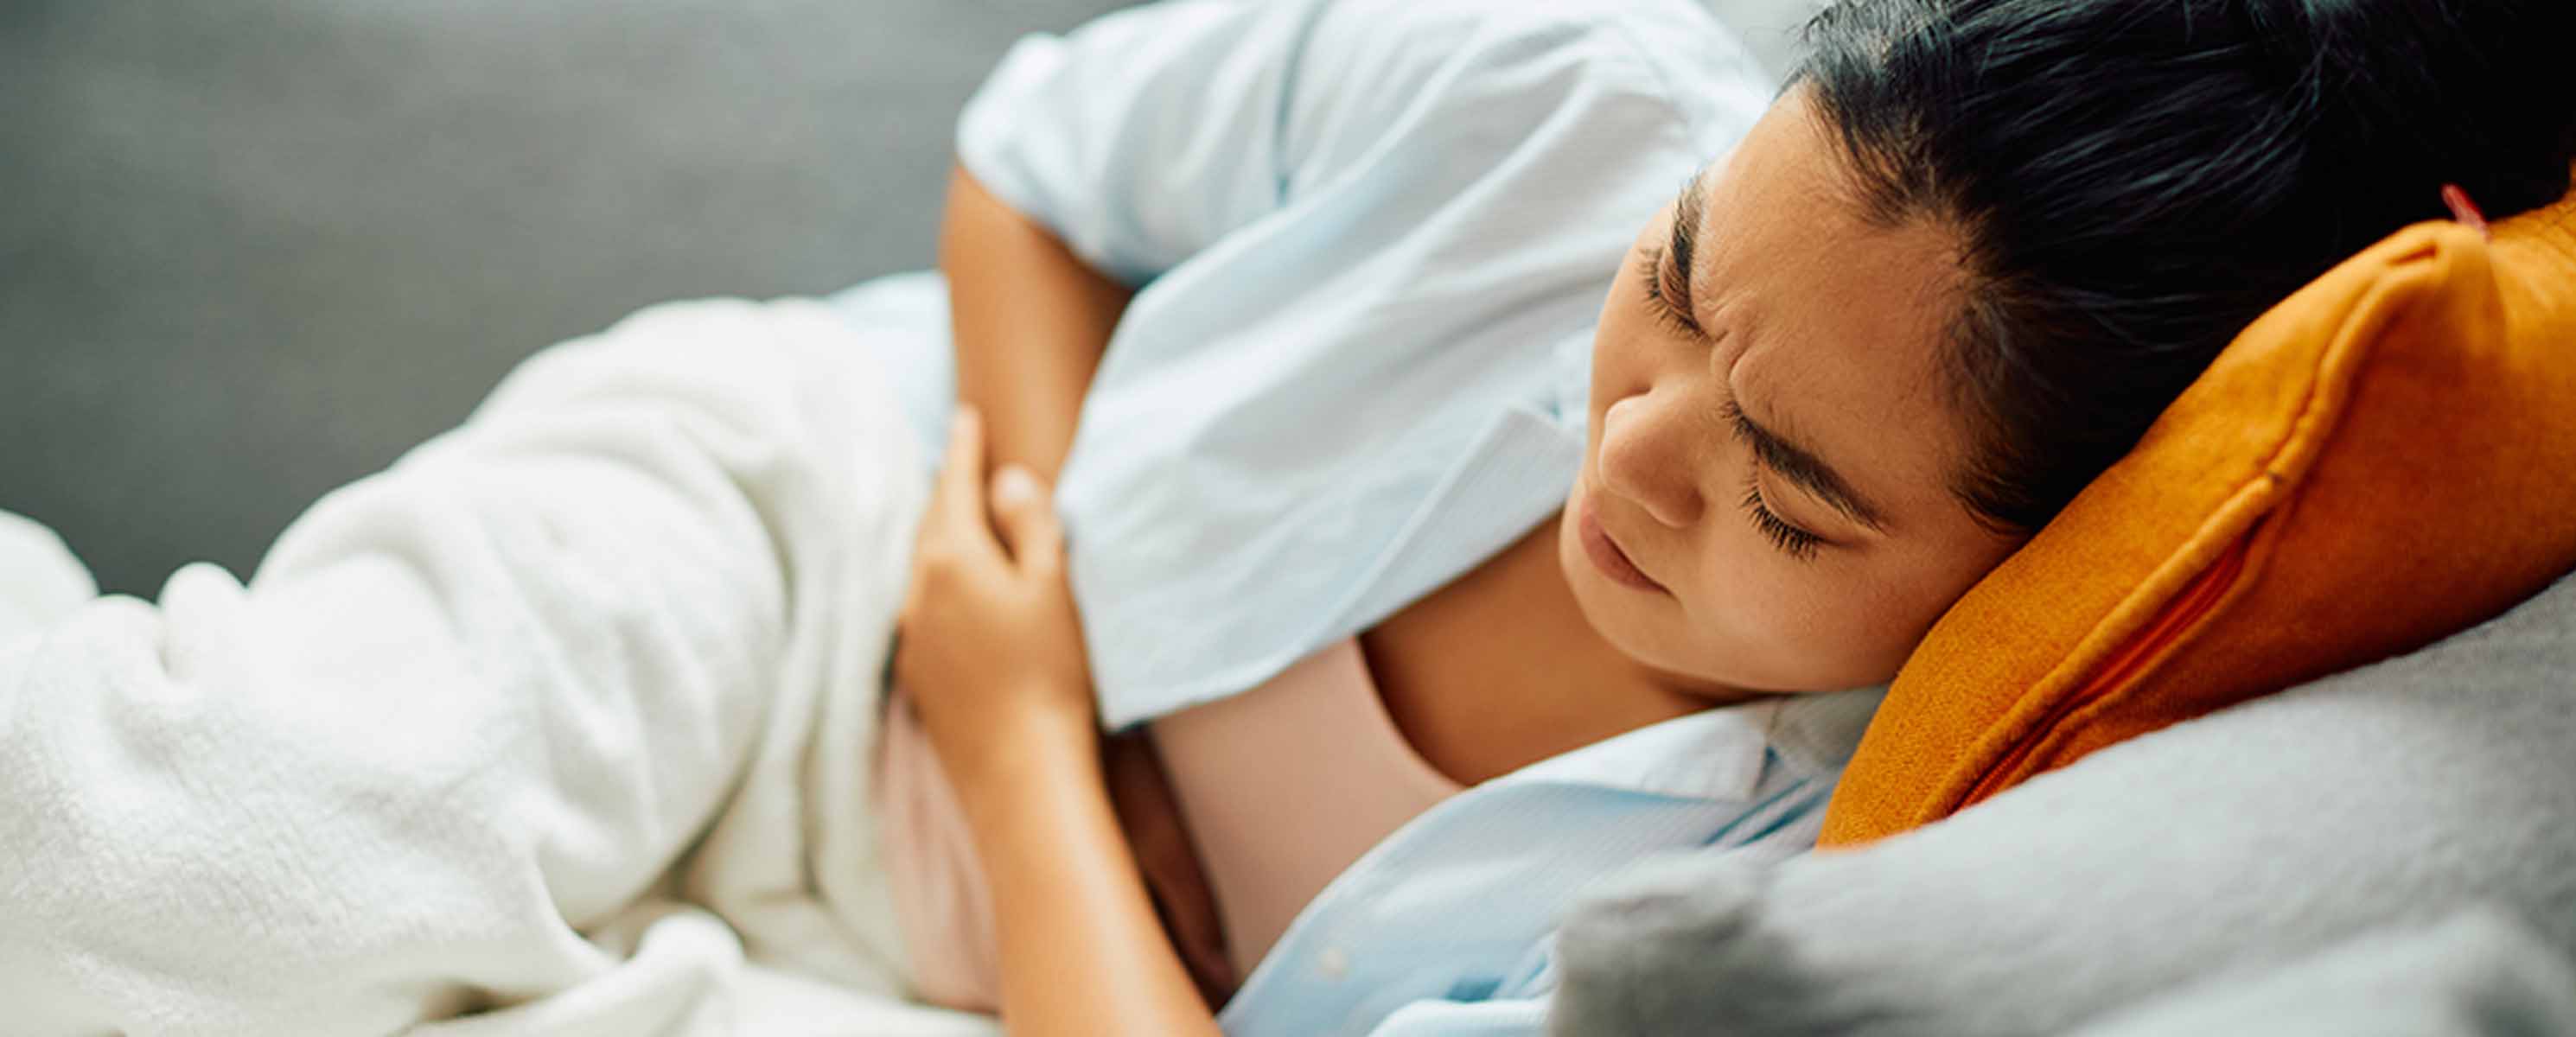 Woman laying on couch holding her stomach